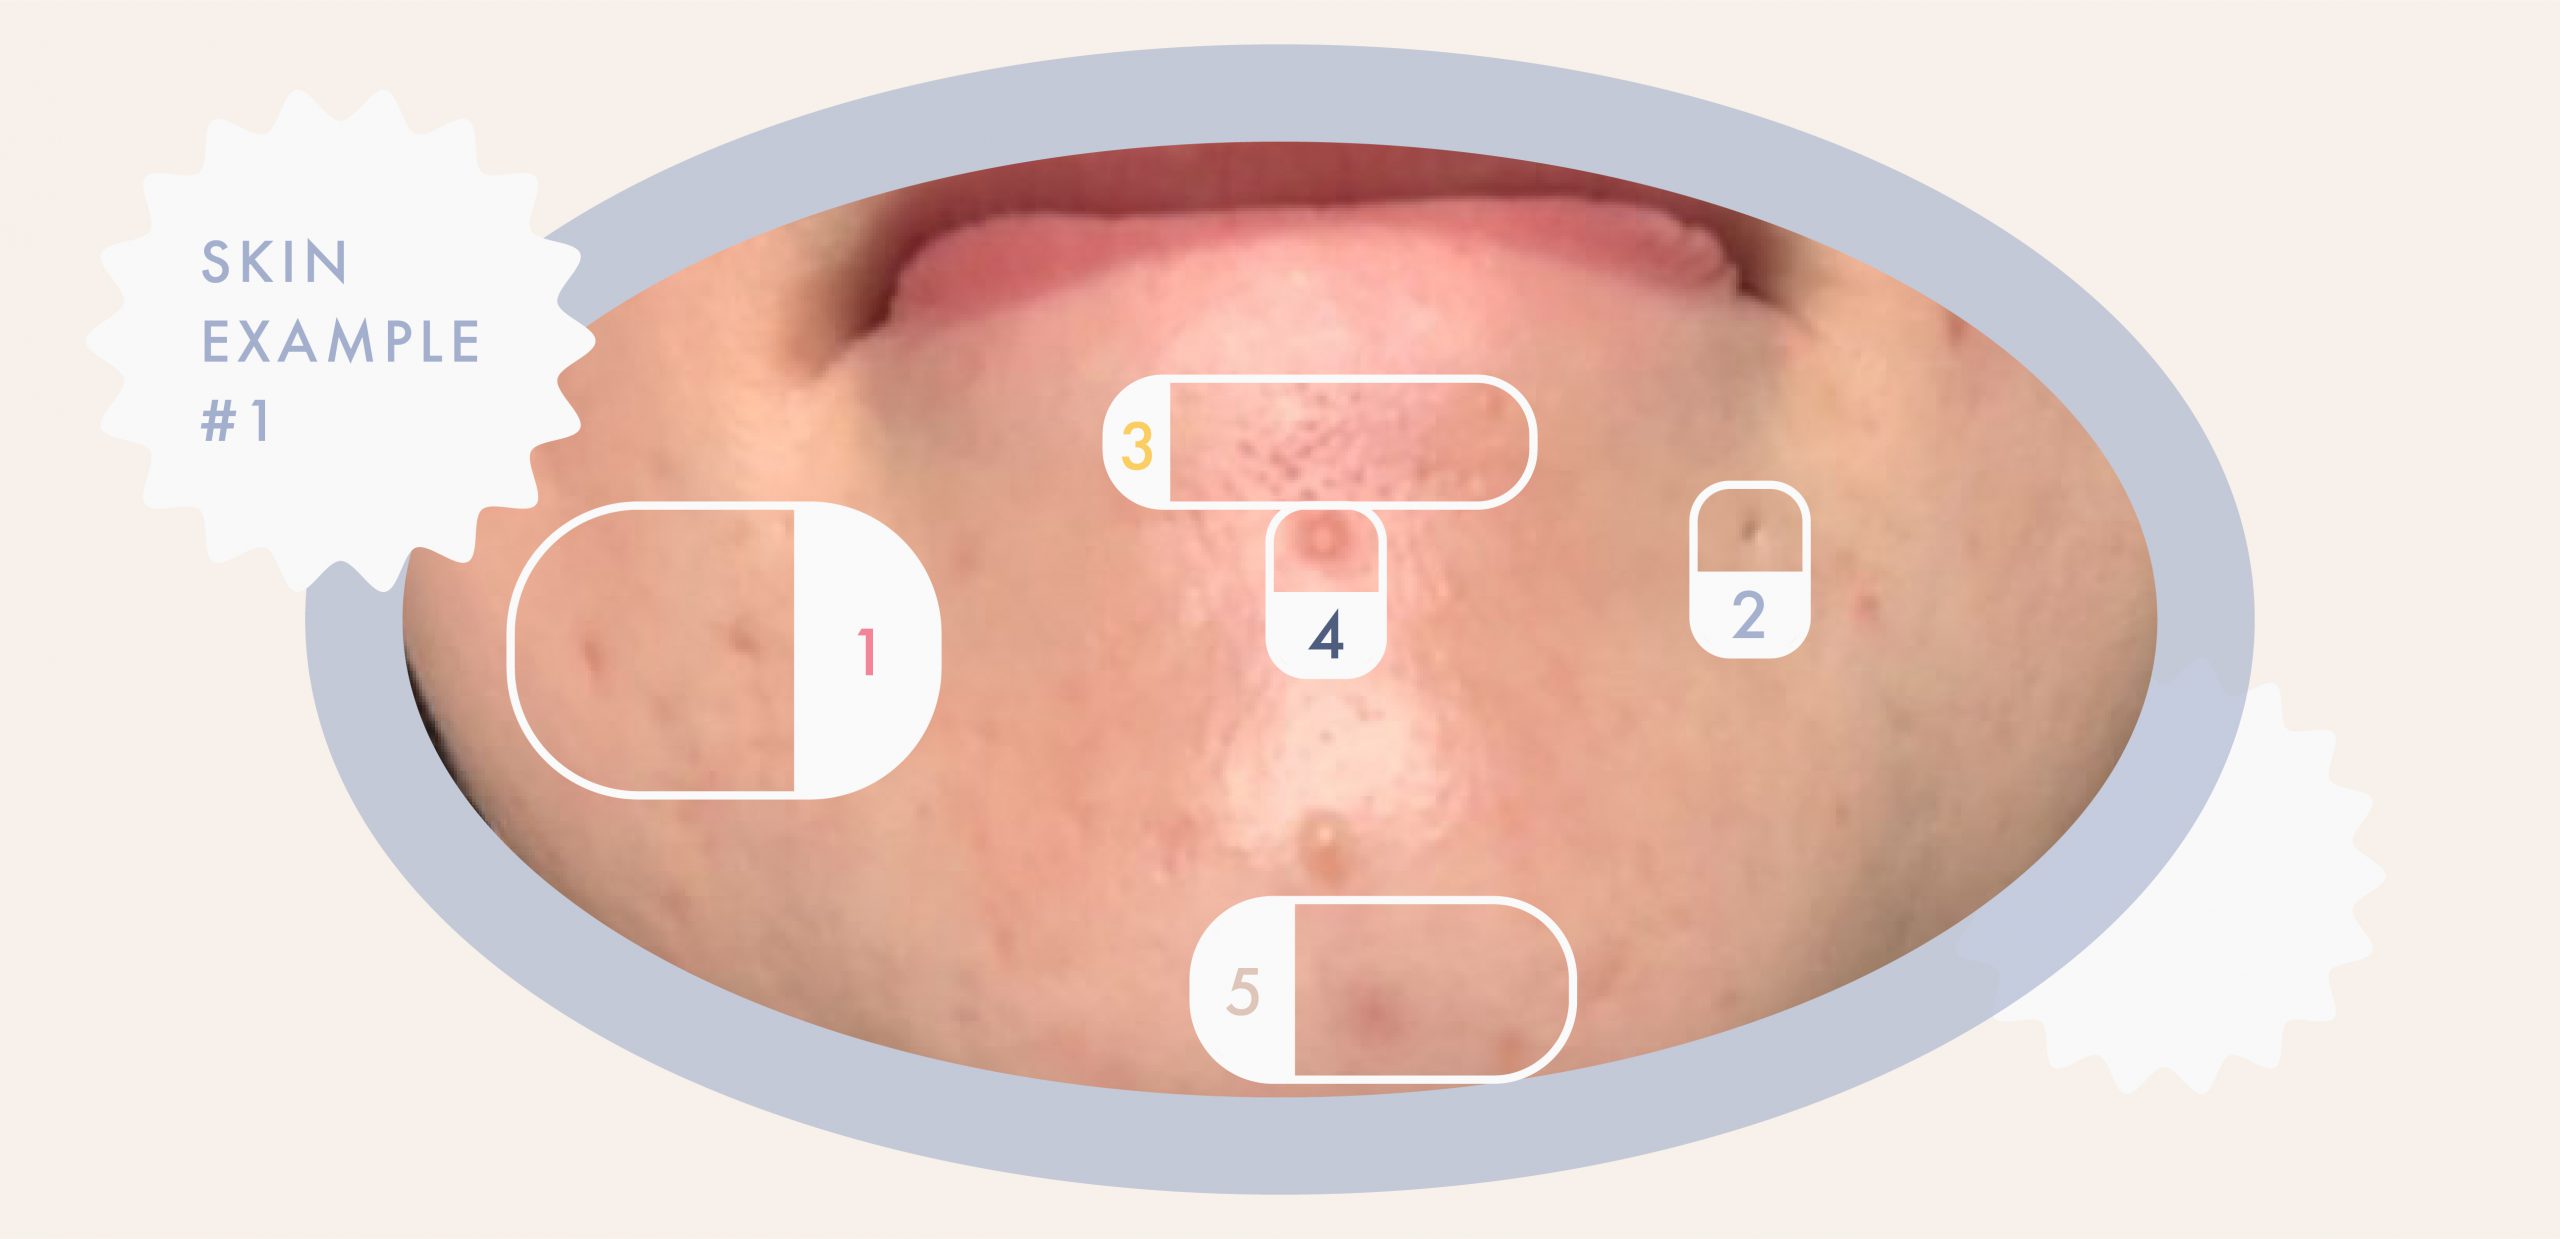 Enlarged pores on a woman's chin